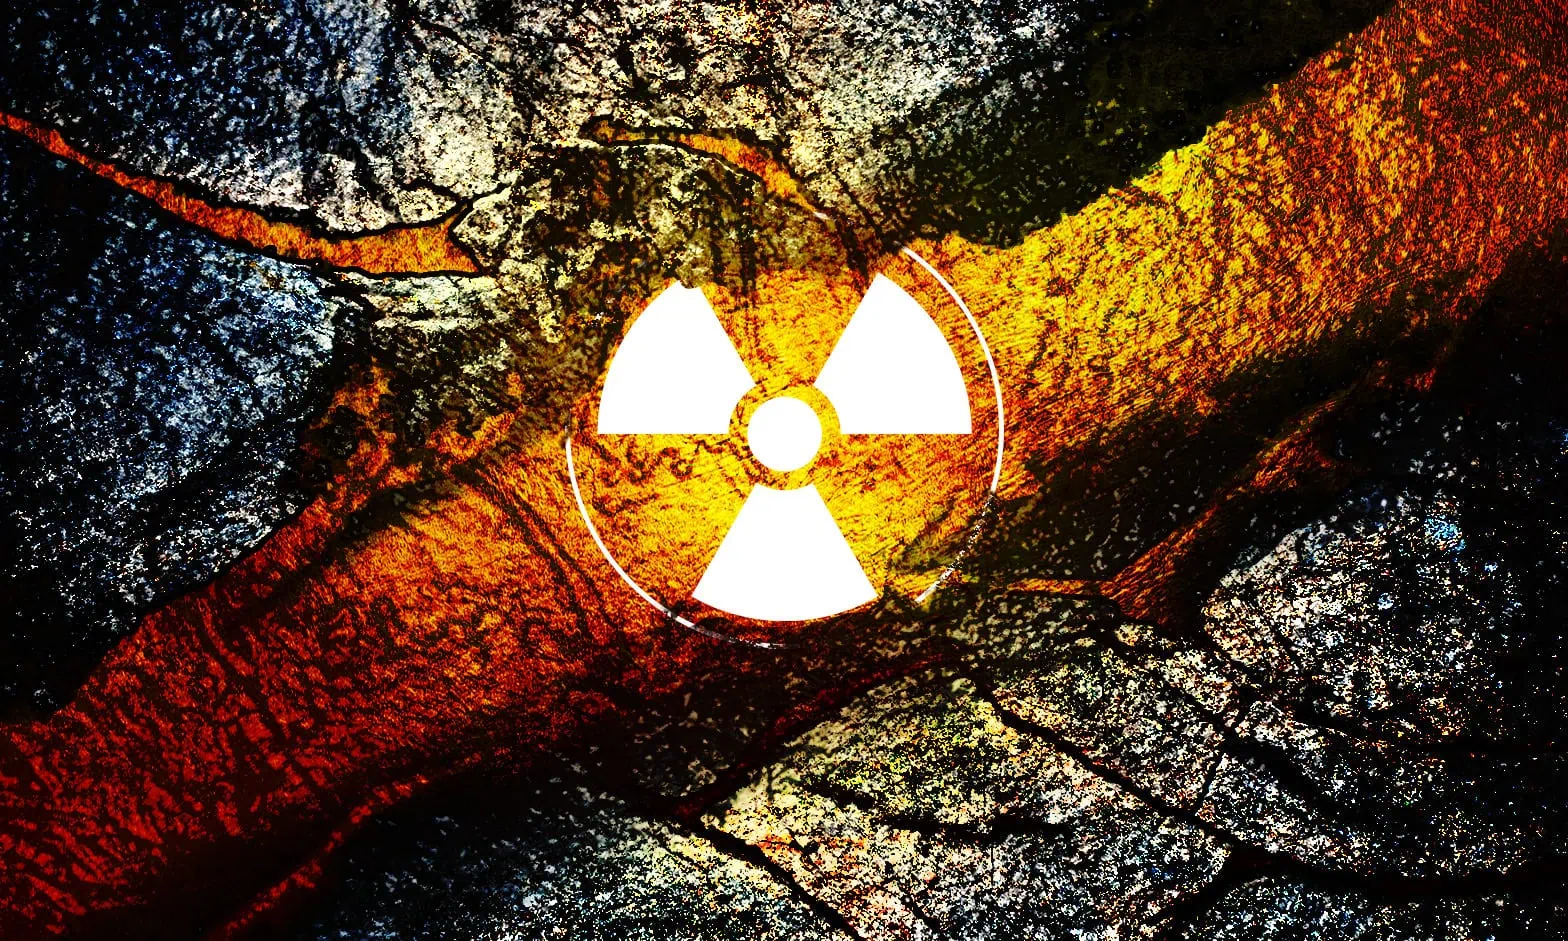 Uranium and the Renewal of Nuclear Energy